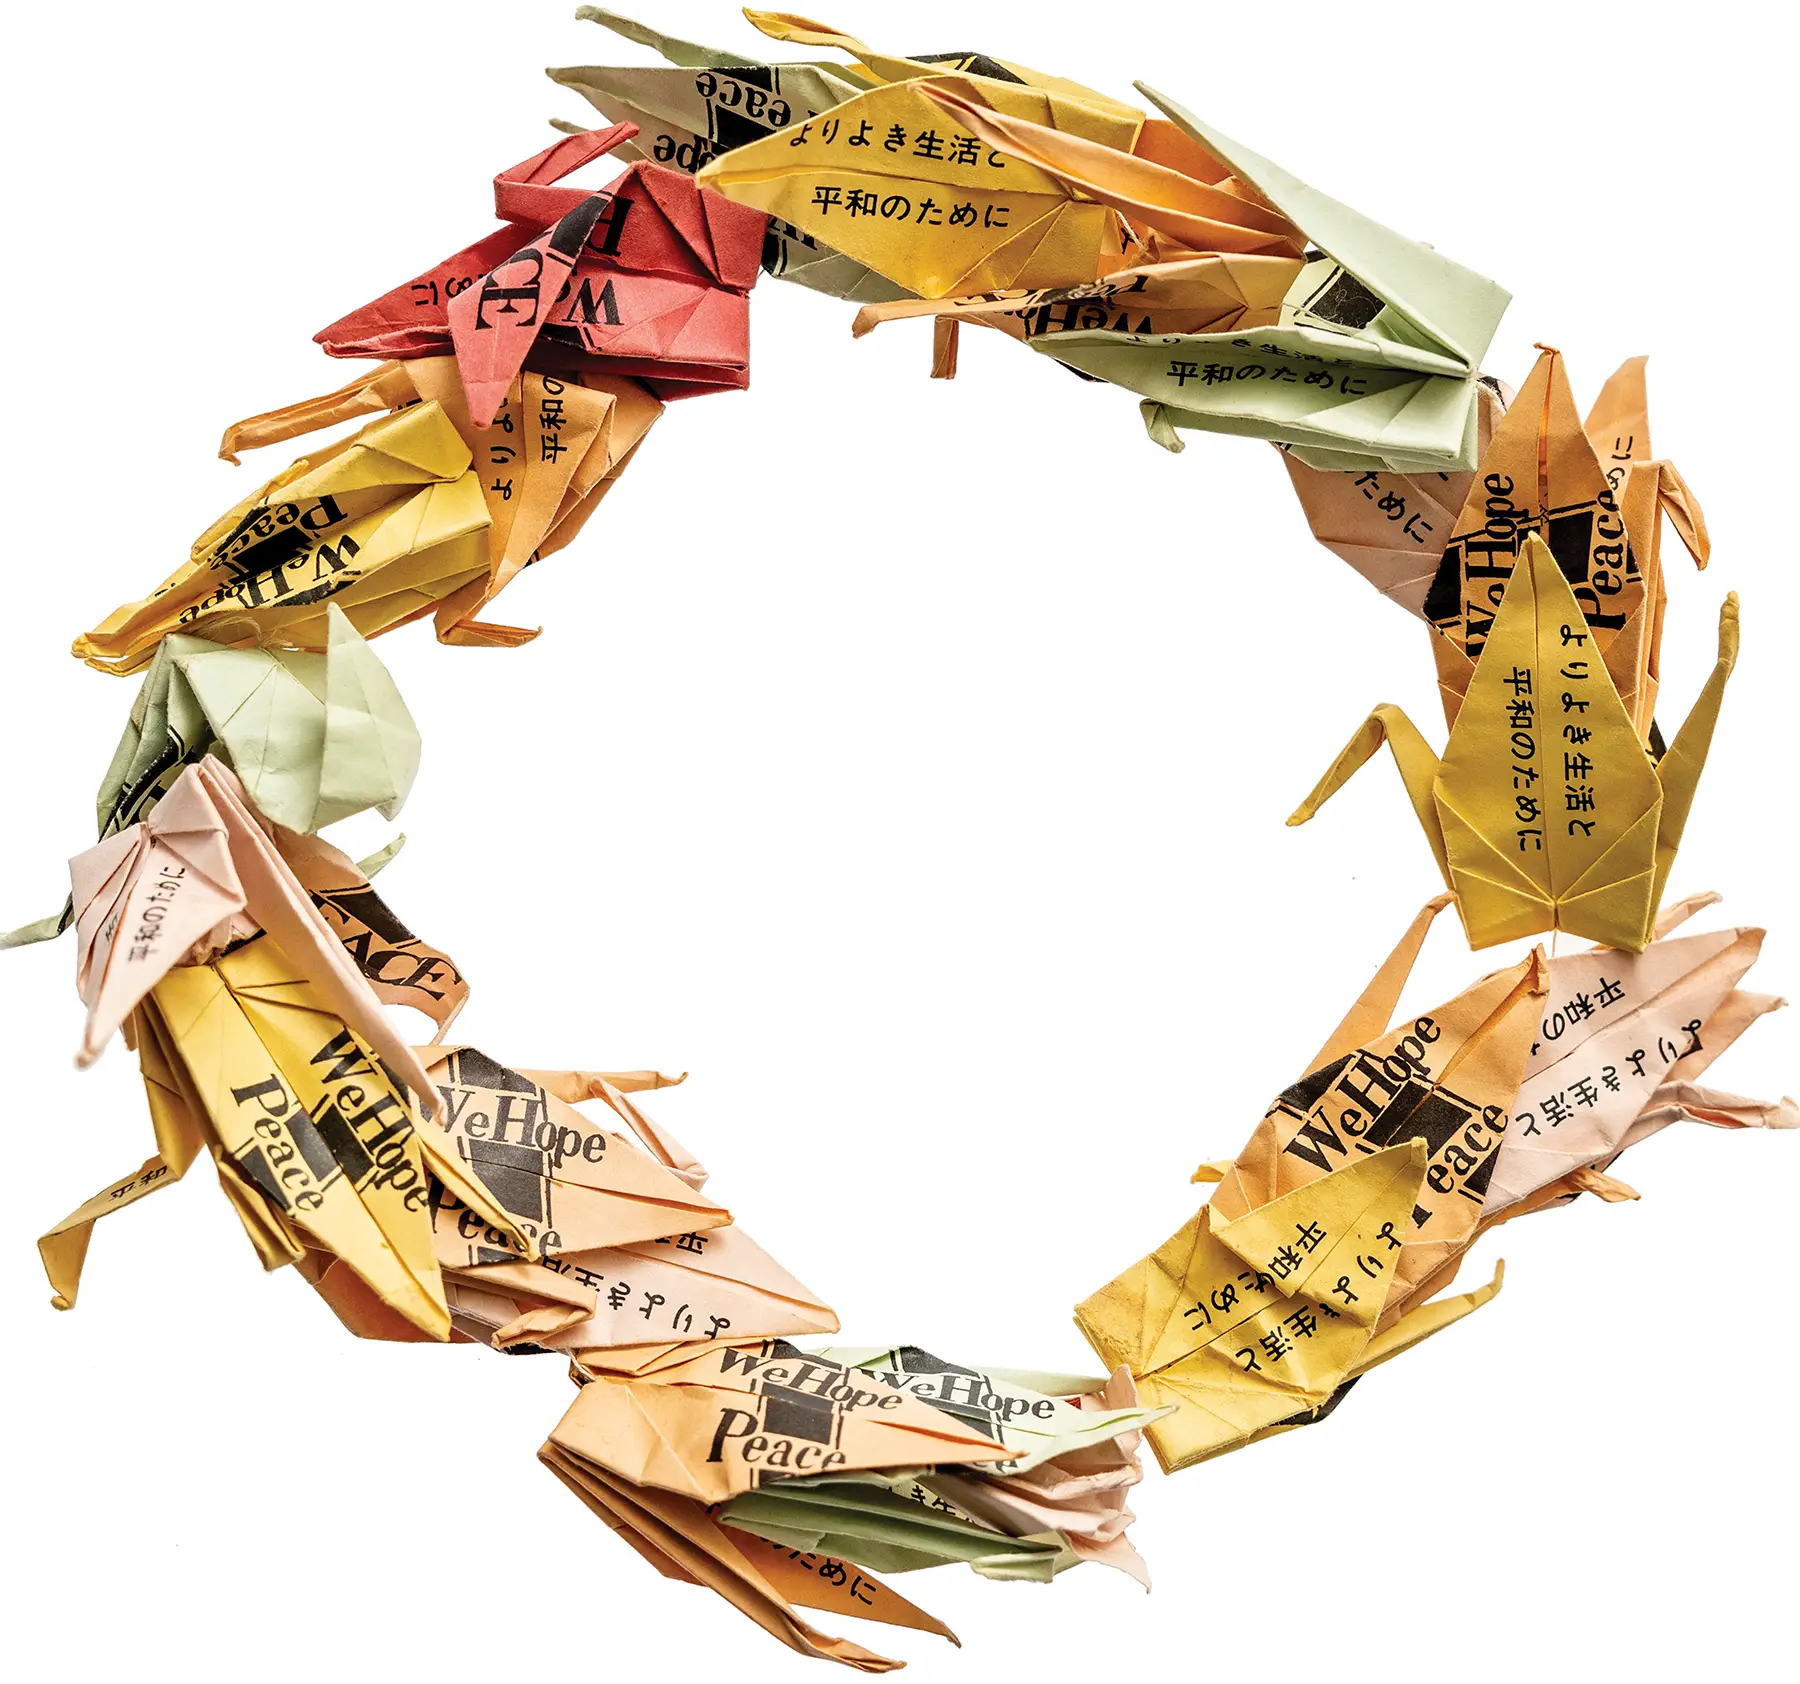 A faded wreath of multicolor paper cranes that say “We hope for peace” in English, and “for peace” and “for better life” in Japanese.